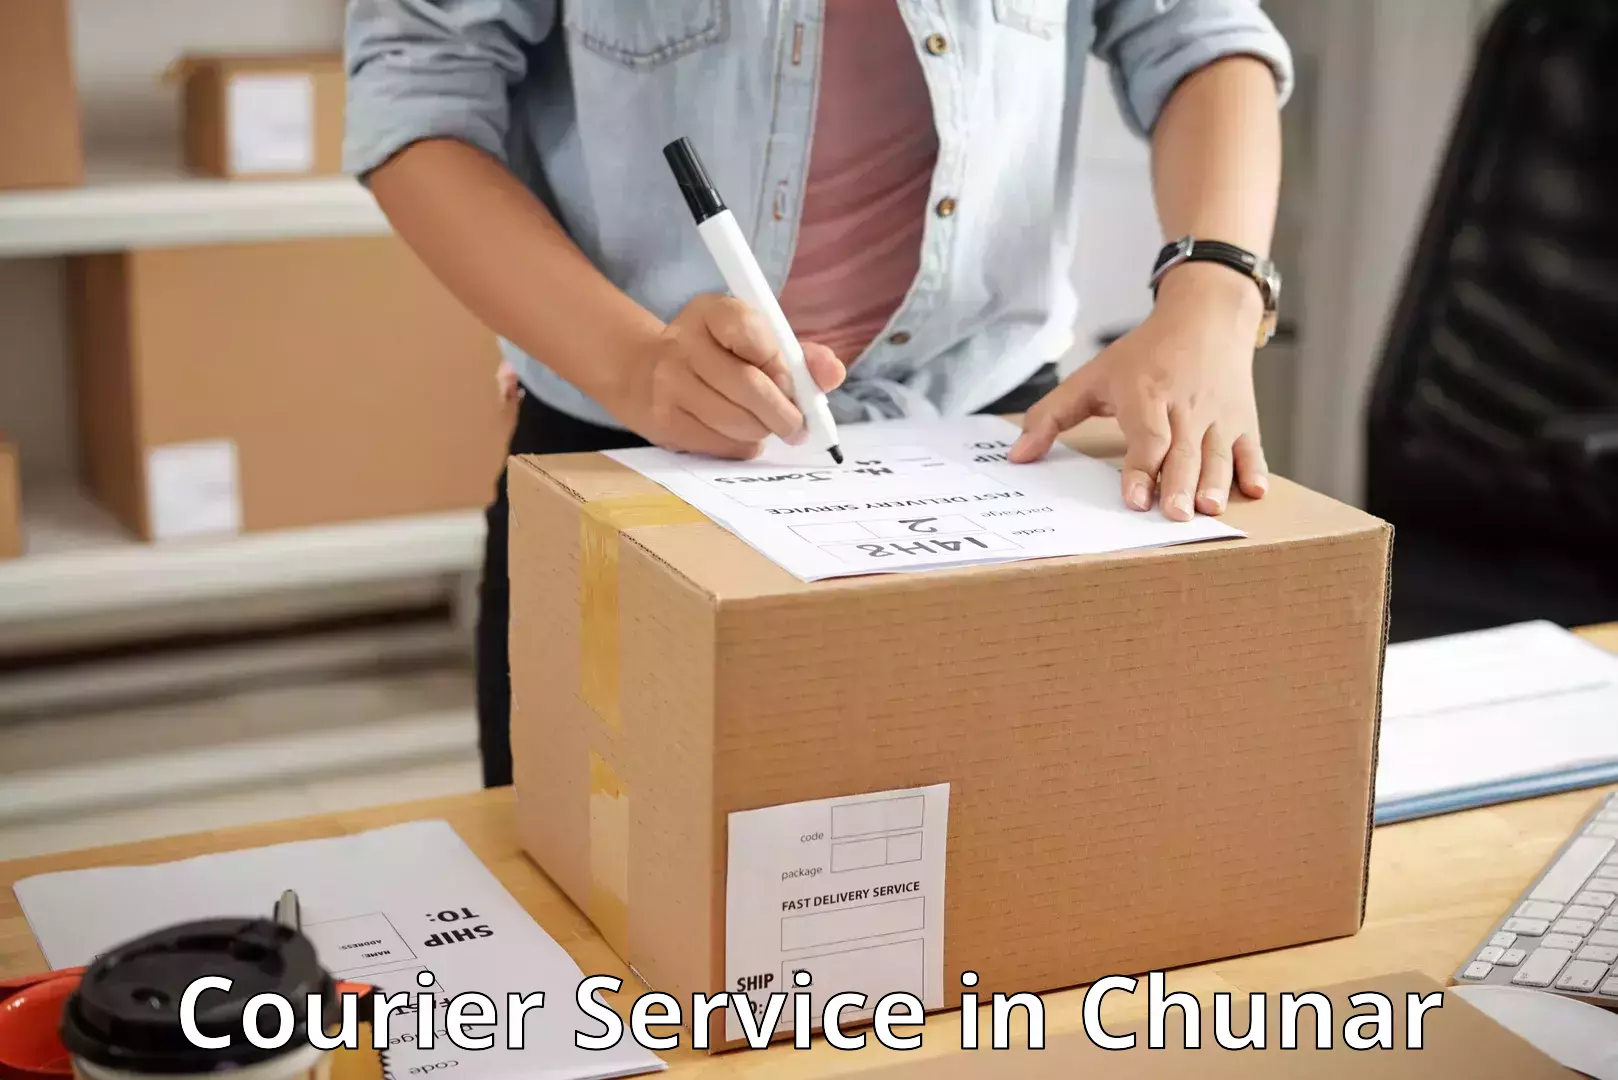 Rapid shipping services in Chunar